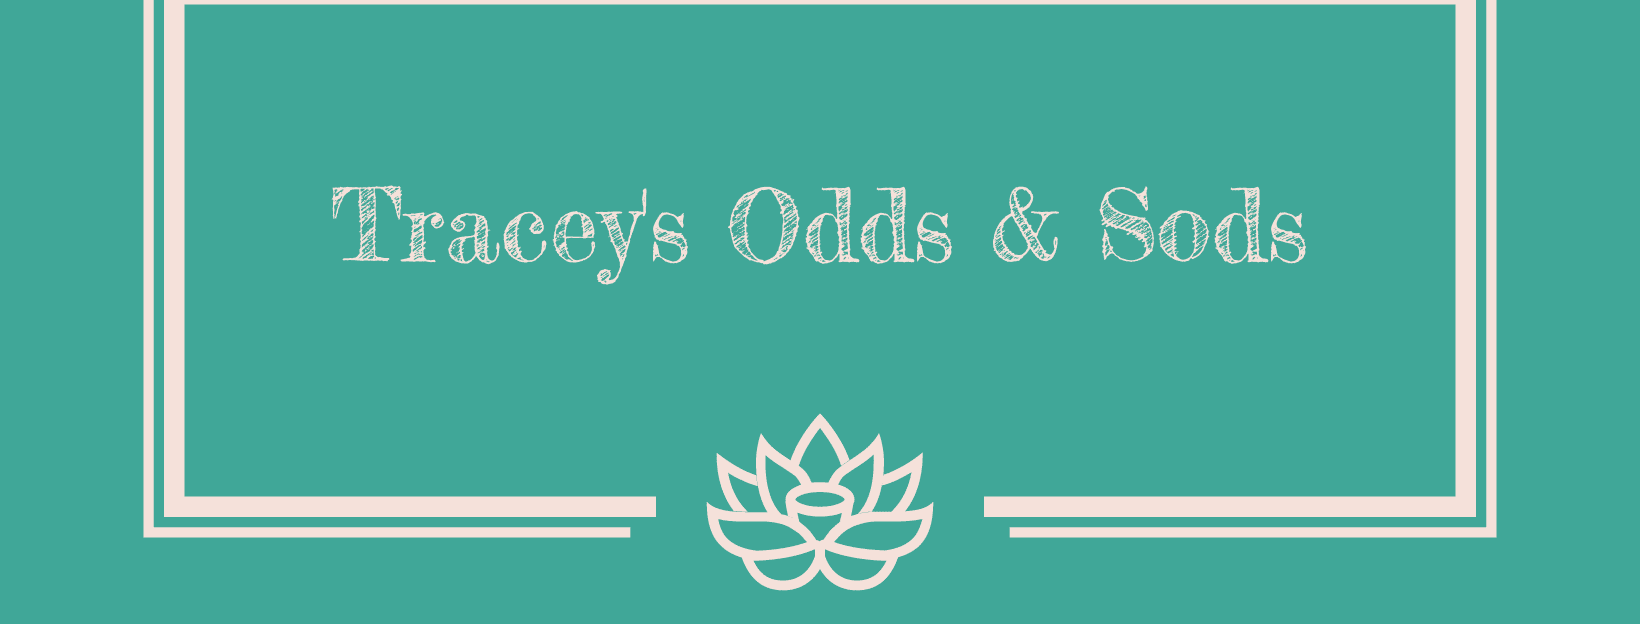 Tracey's Odds and Sods